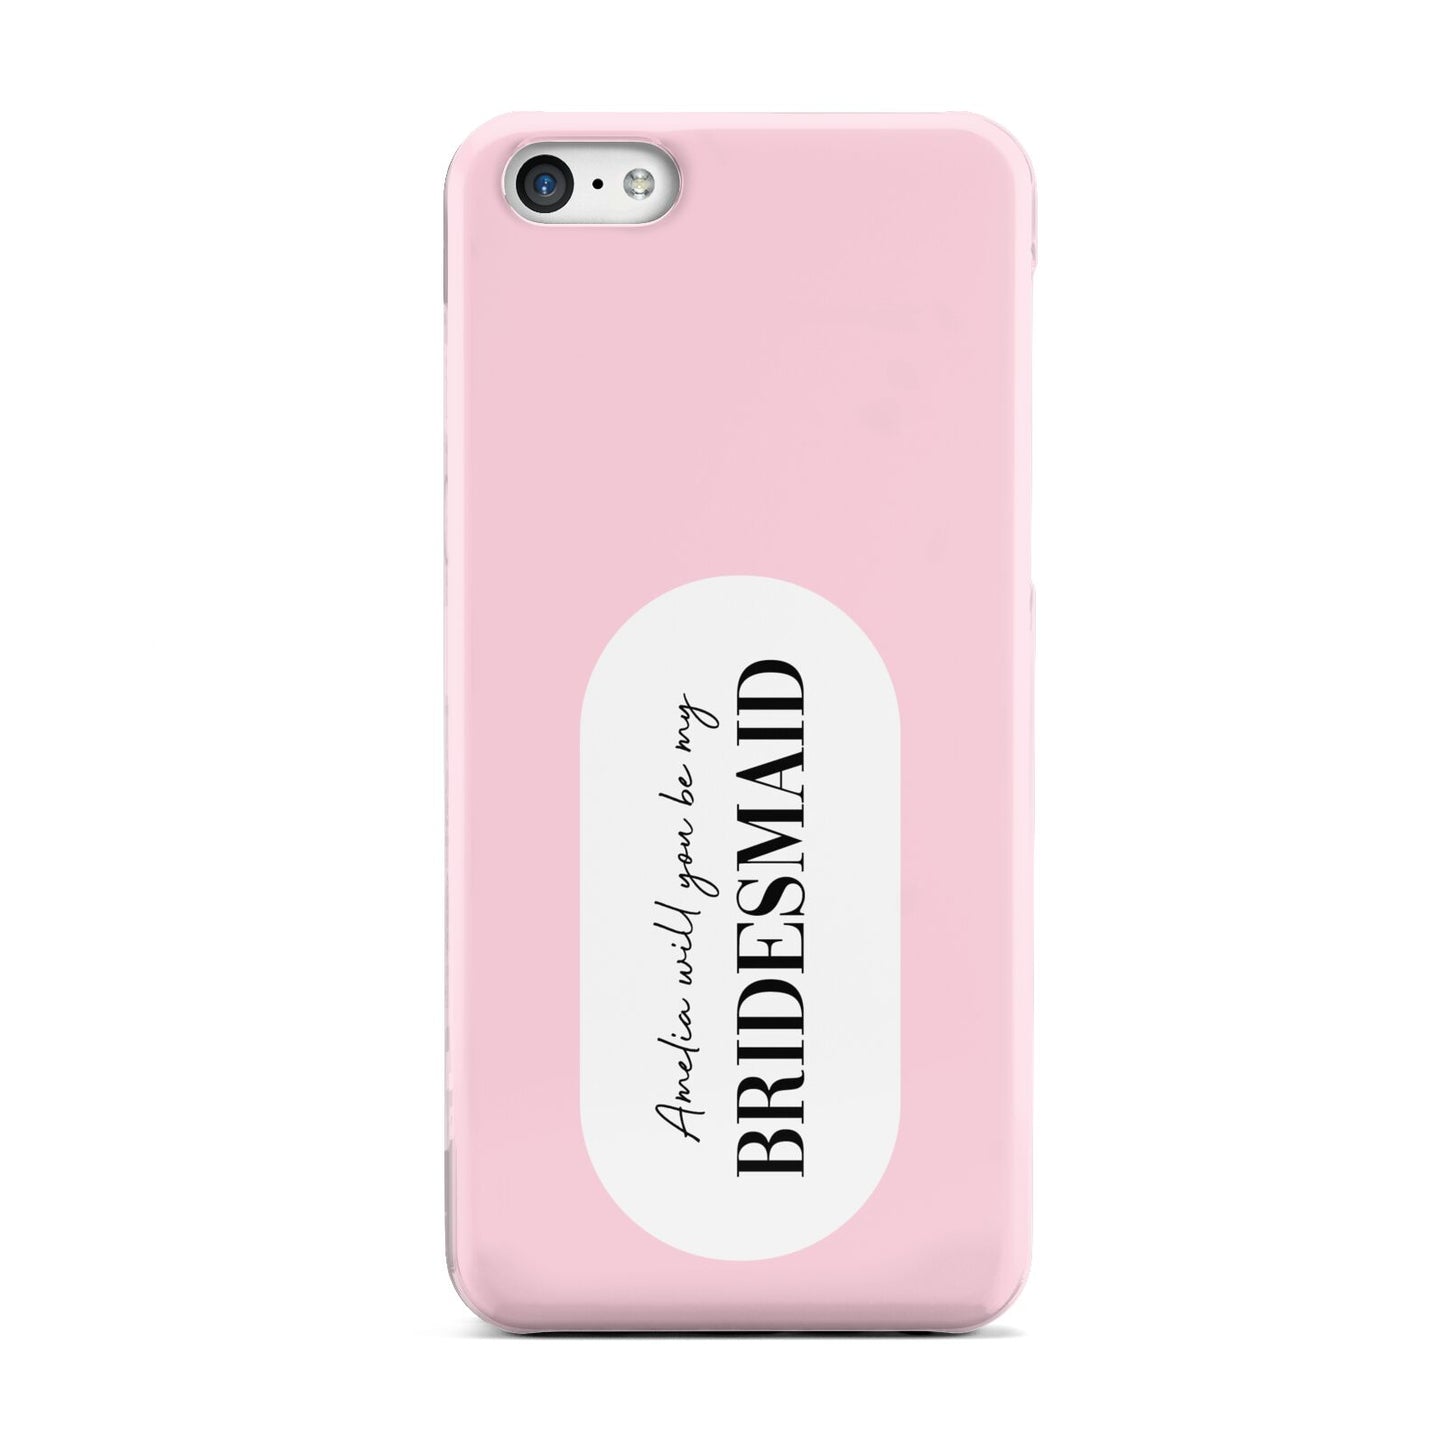 Will You Be My Bridesmaid Apple iPhone 5c Case